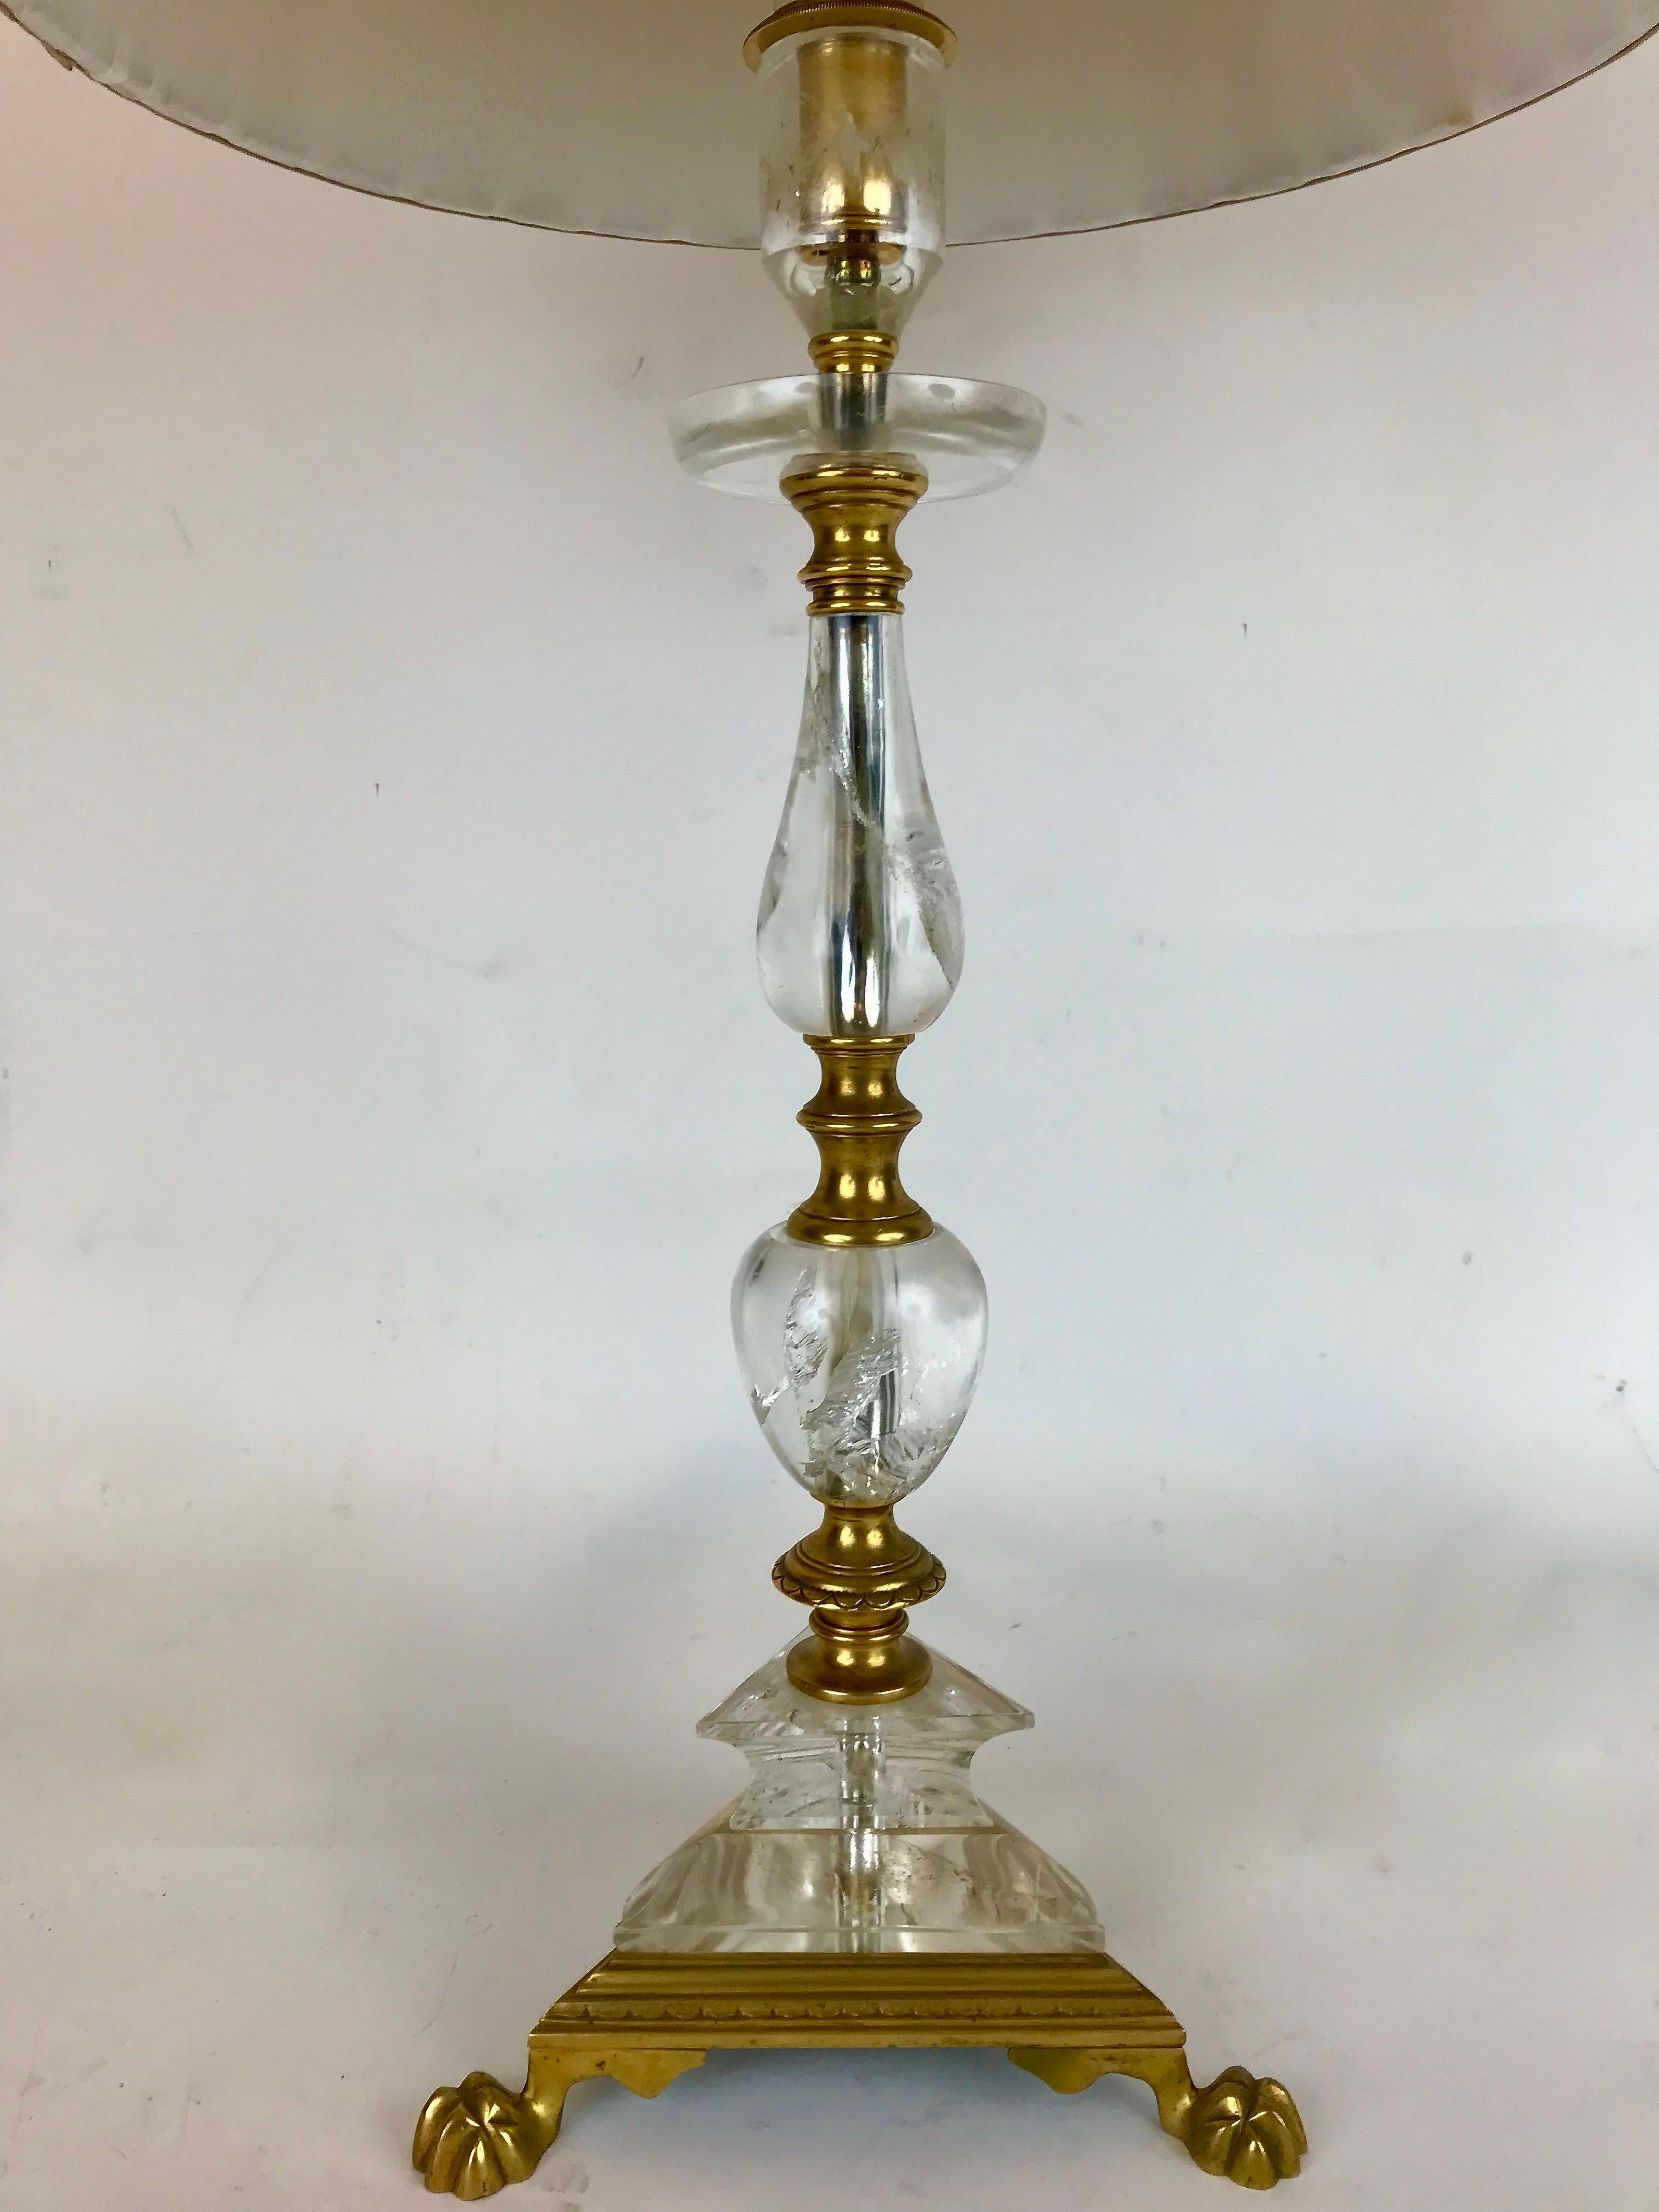 20th Century Rock Crystal and Gilt Bronze Pricket Form Lamp Attributed to F. F. Caldwell For Sale